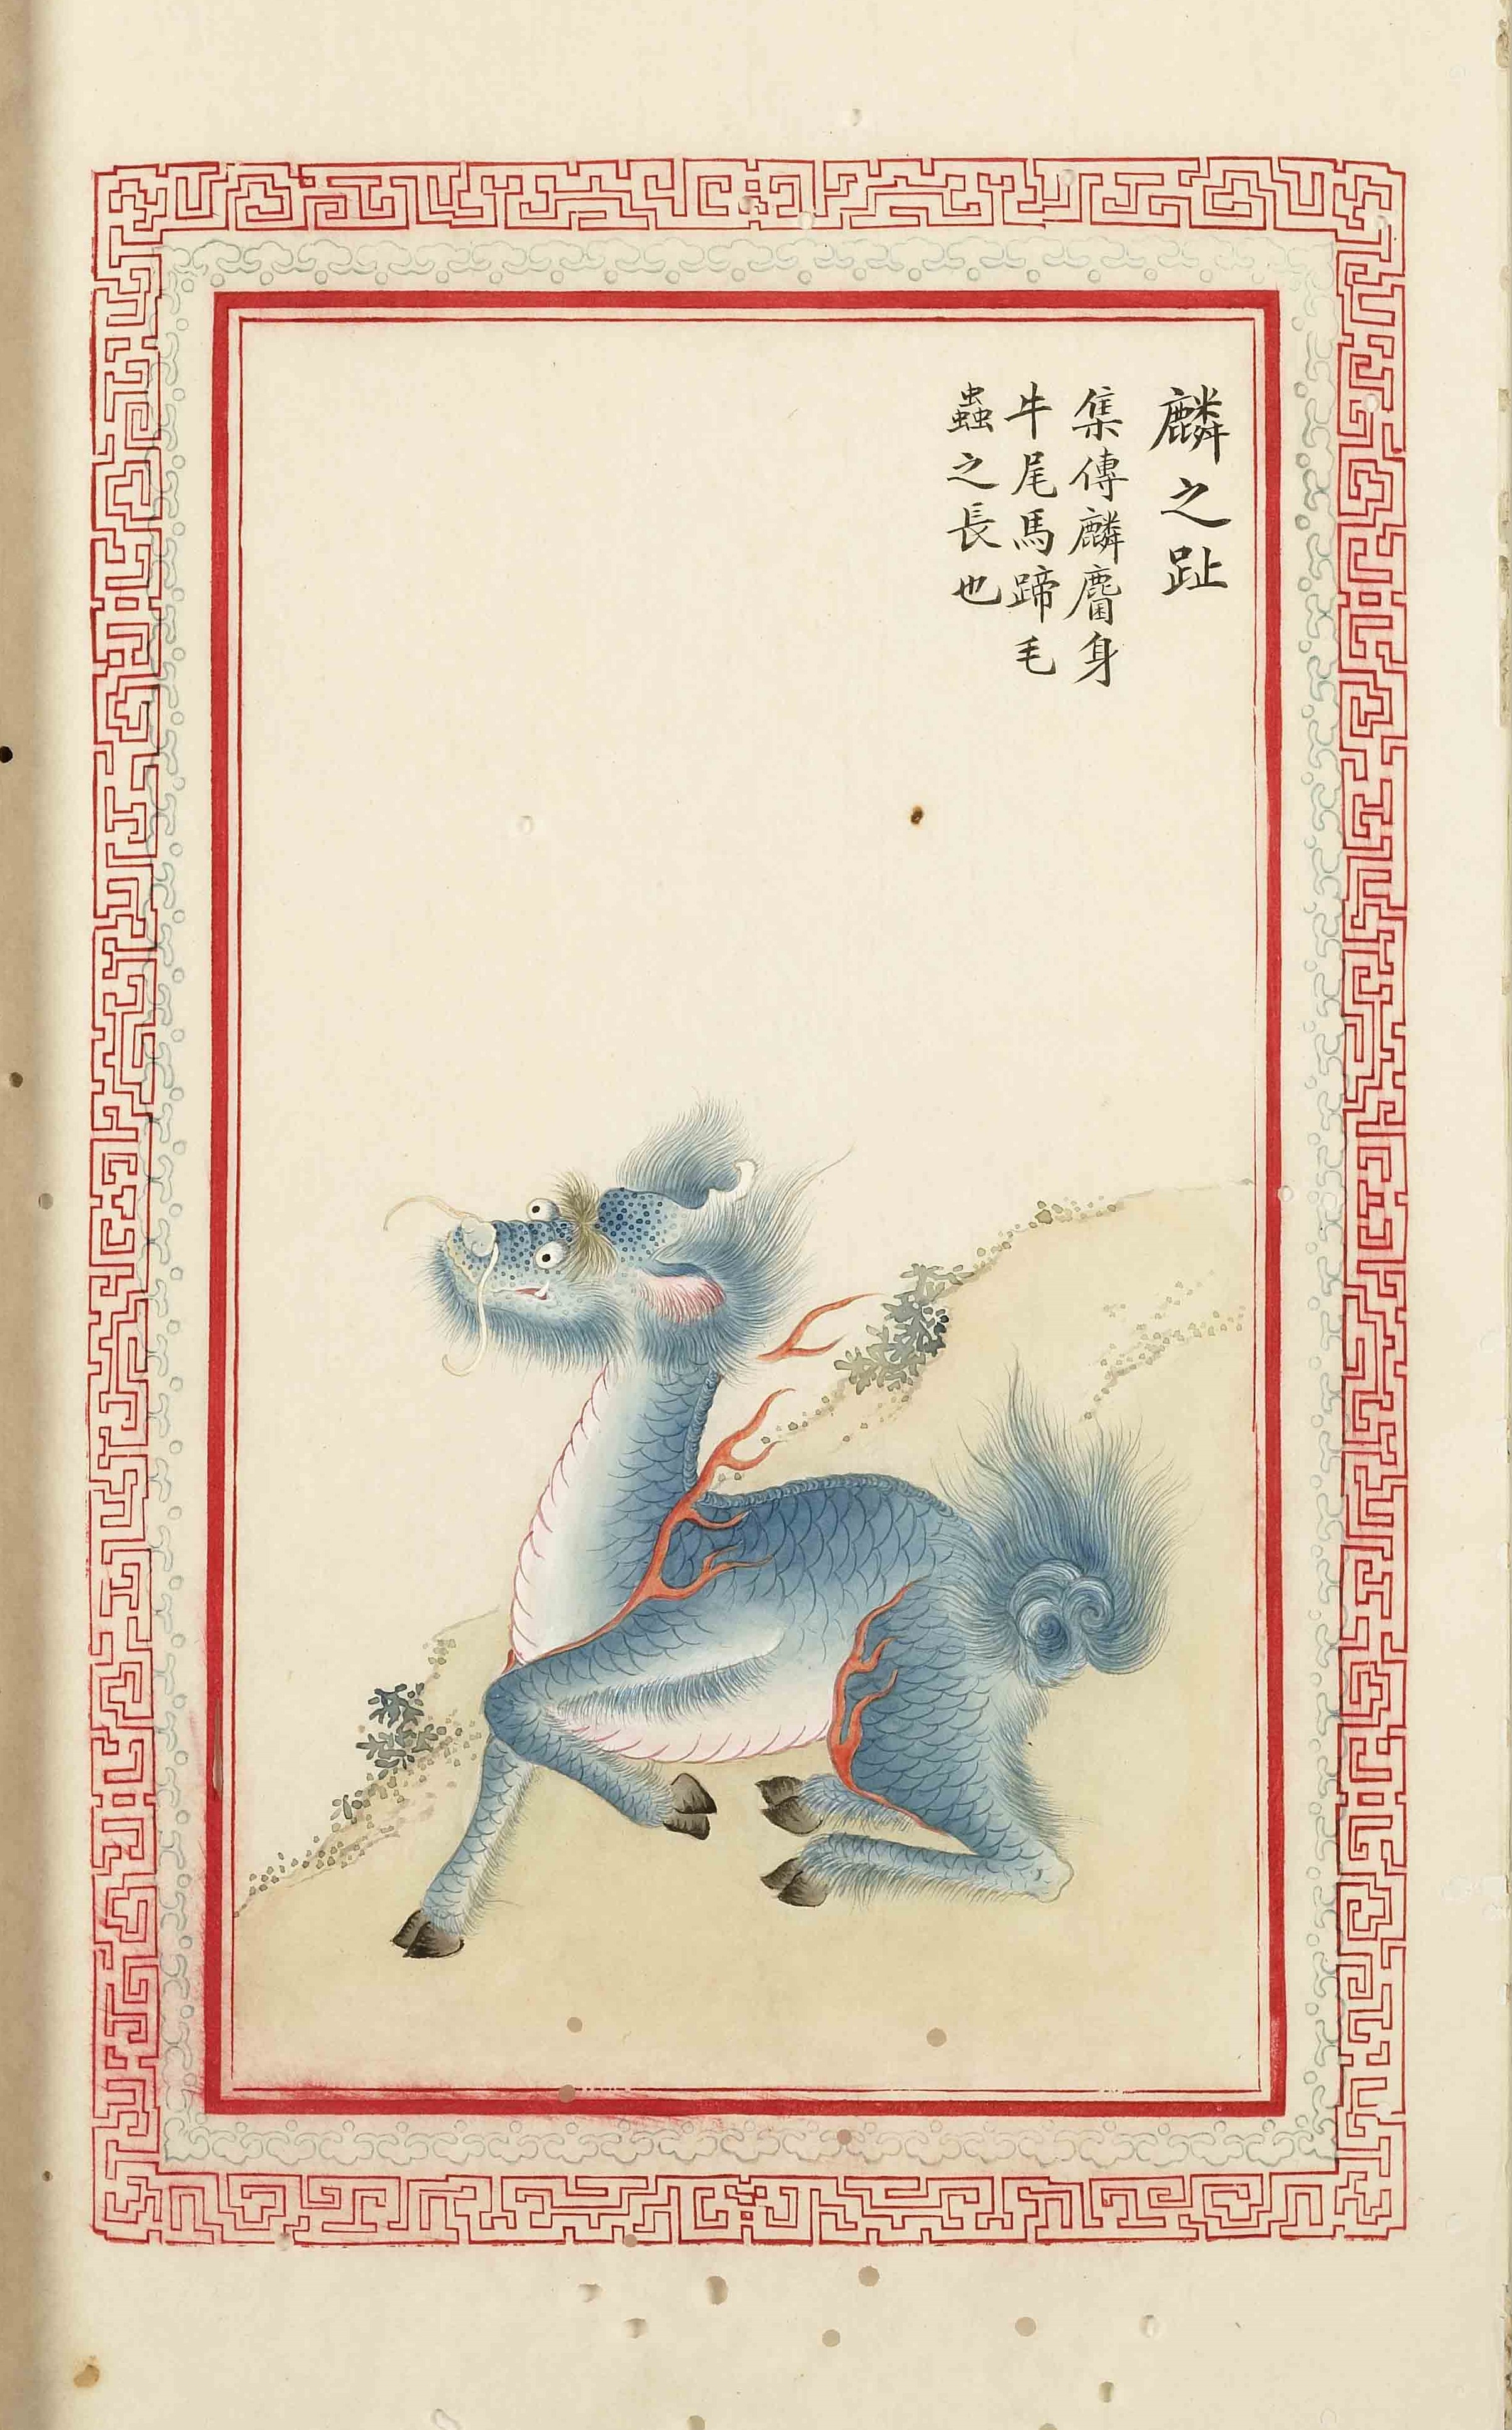 Trace of the Qilin, An Illustrated Study of the Miscellaneous Items in the Mao’s Edition of The Book of Songs, Vol. 3, Book 5